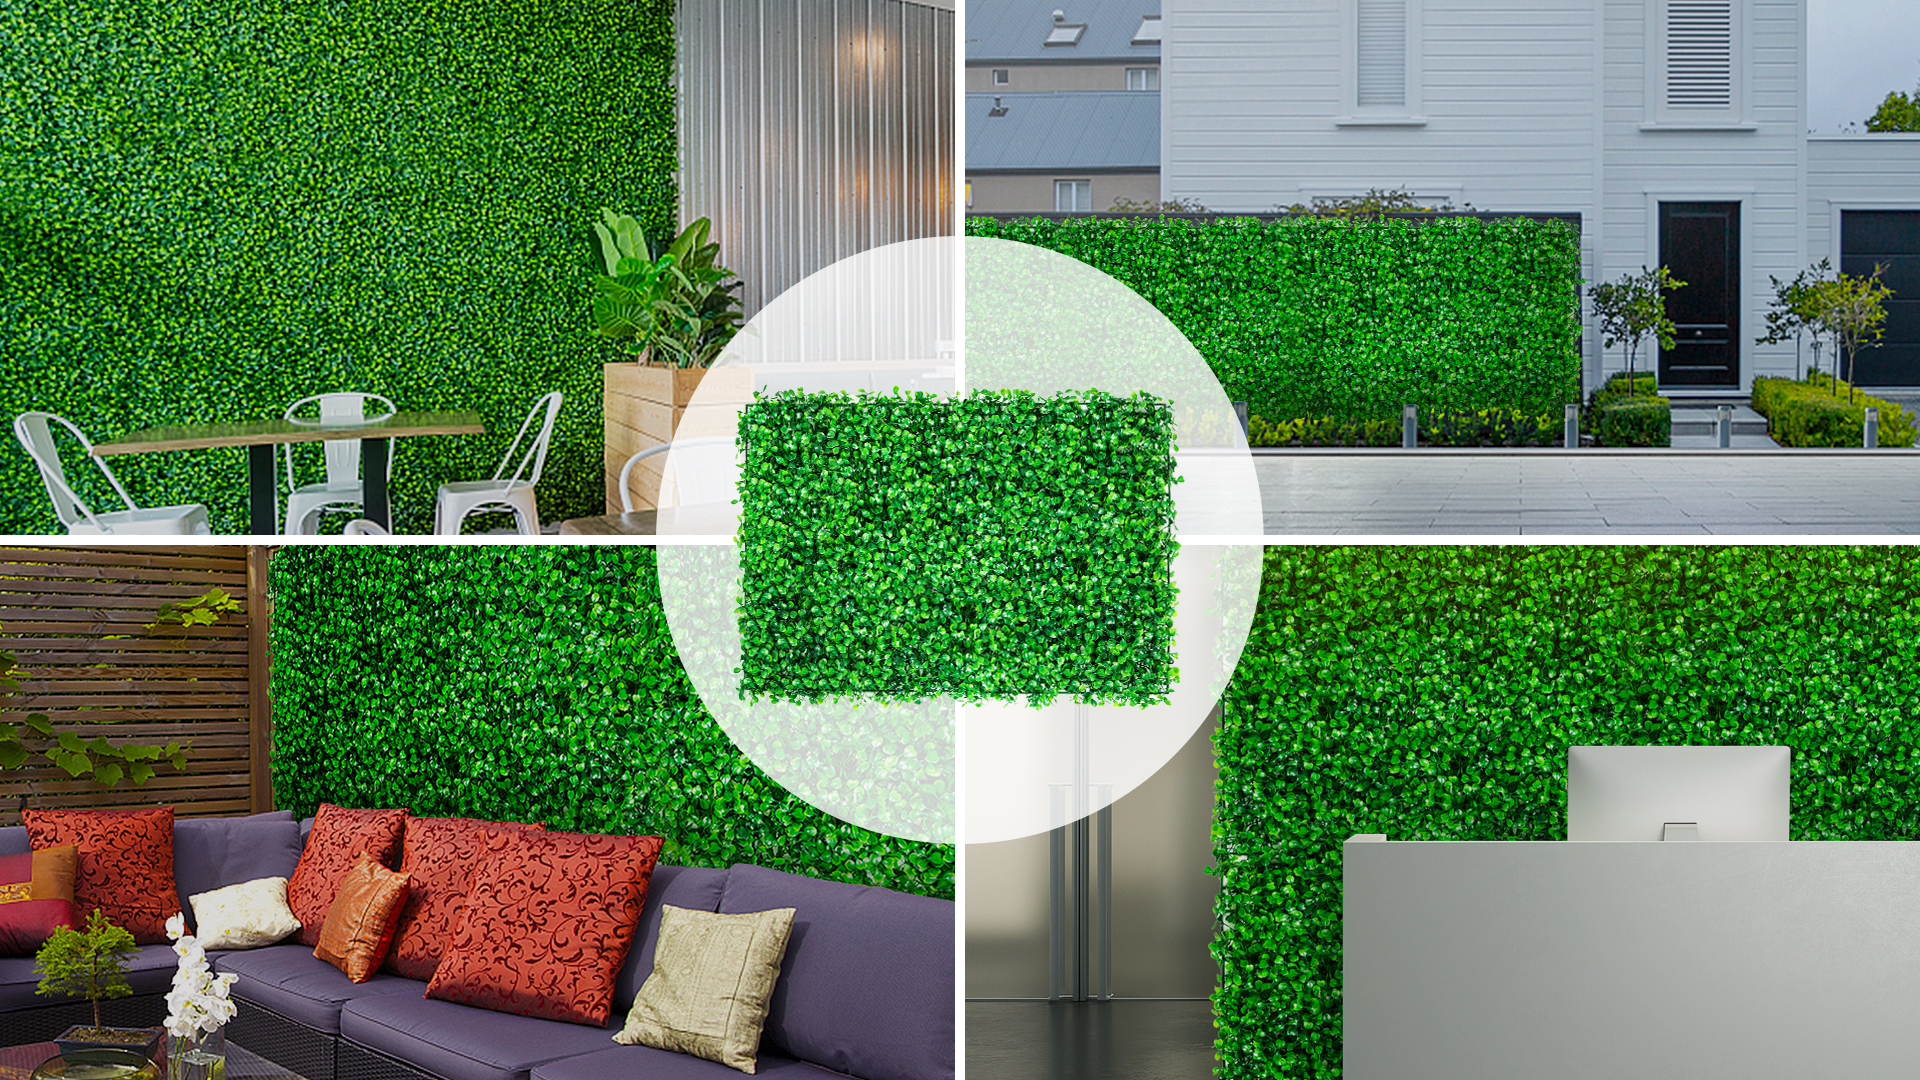 24 x 16 Inch Faux Boxwood Hedge Wall Panel as Greenery Backdrop Garden Fence Artificial Boxwood Panels UV Protected Boxwood Hedge Mat for Indoor Wall Decoration and Outdoor Balcony